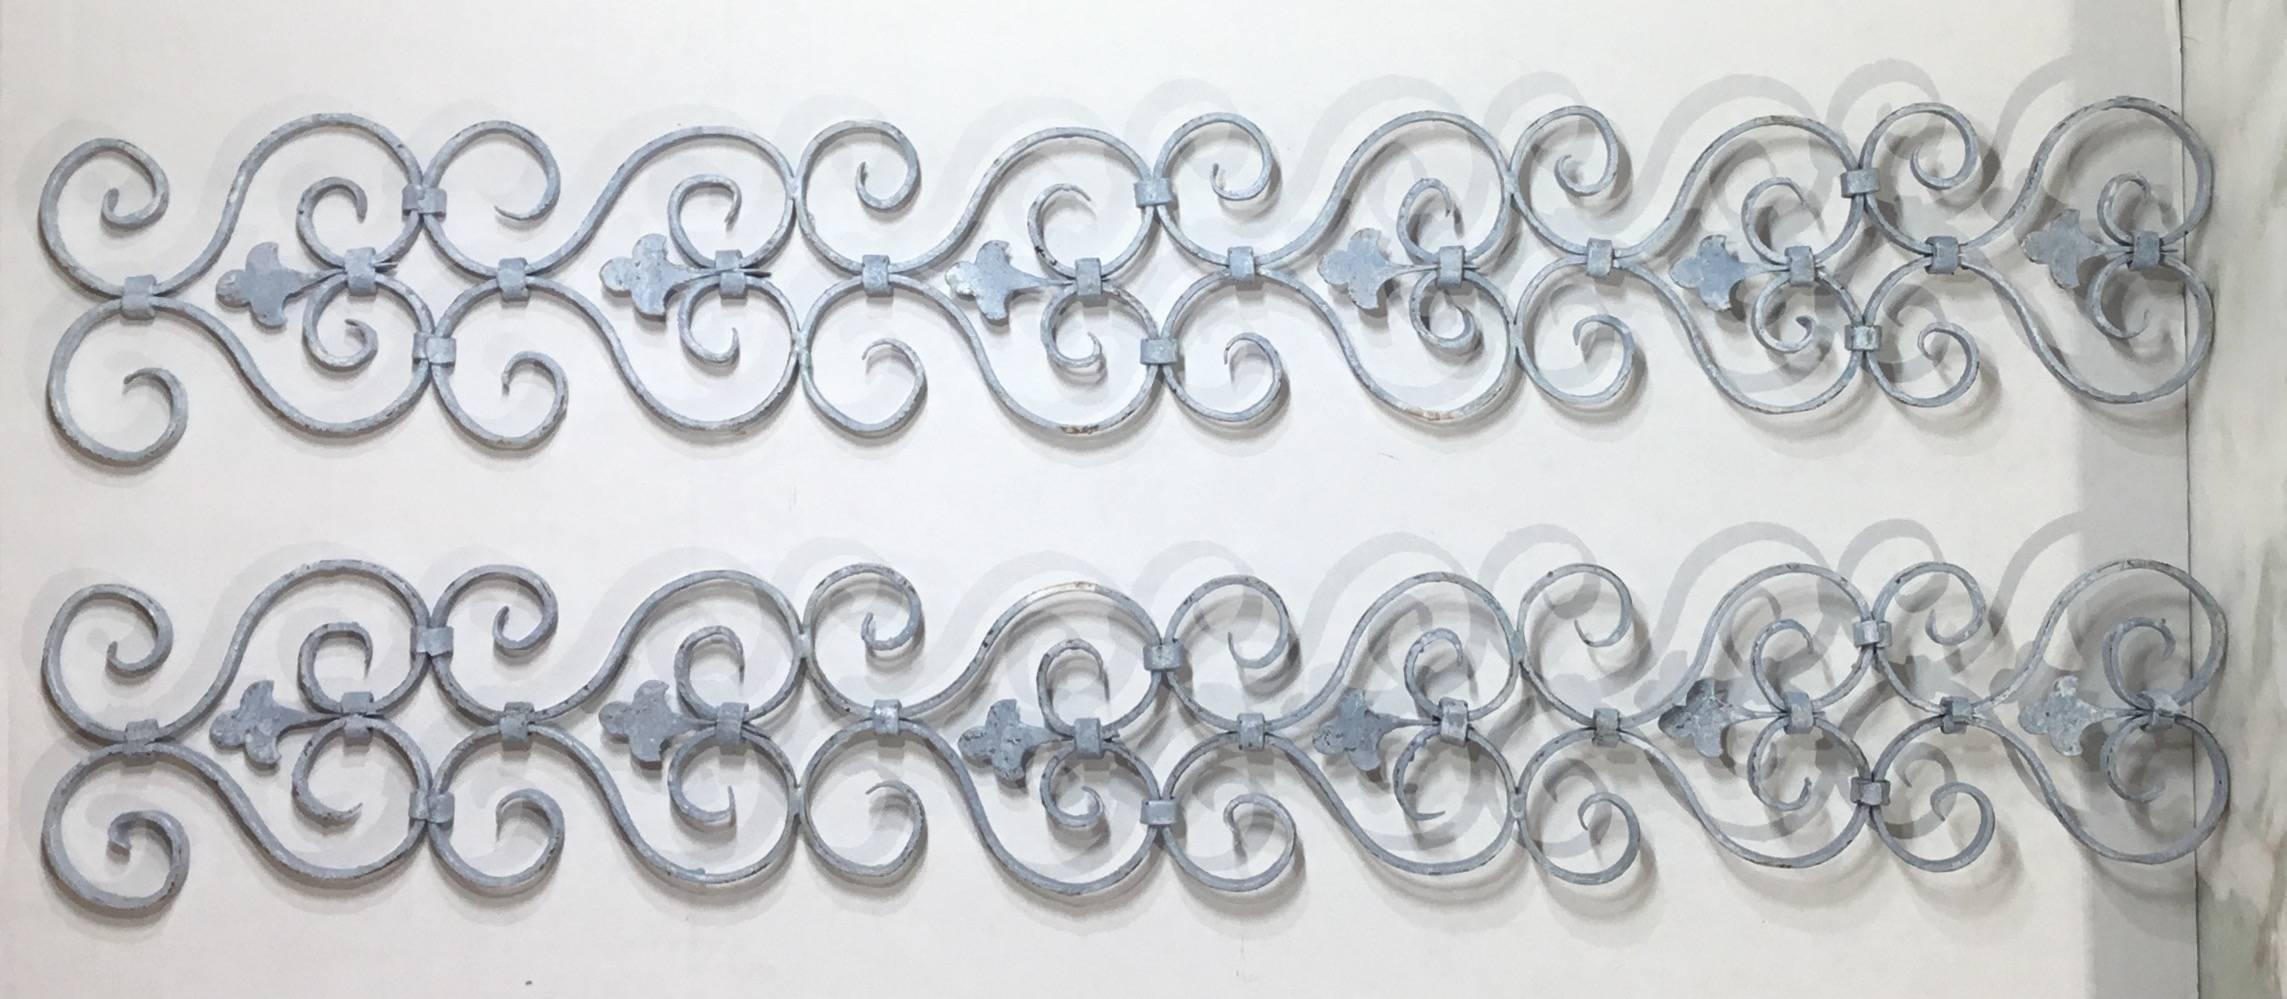 Elegant pair of wall hanging made of handcrafted twisted iron pieces from the Mizner Era of palm beach Florida, put together to become very attractive wall decoration.
Could use horizontal or vertical.